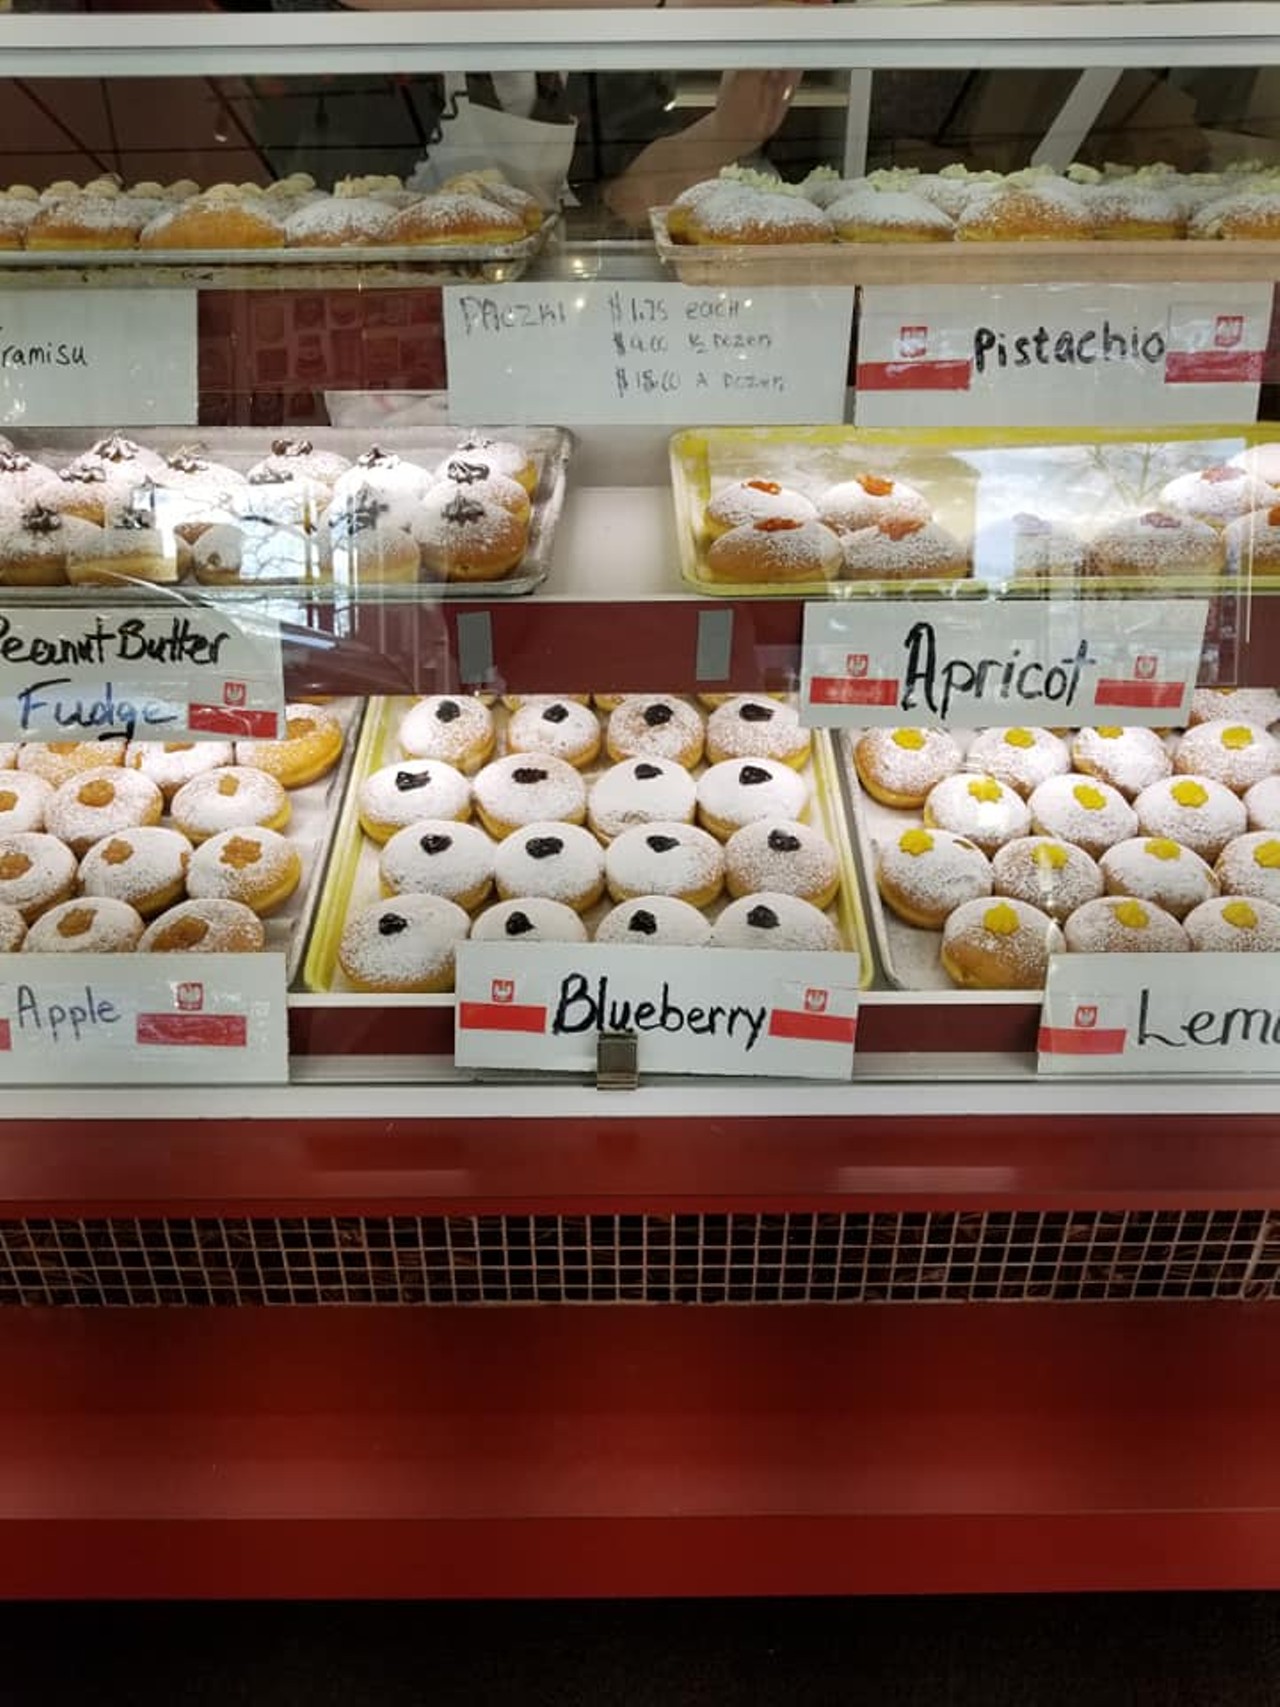  Colozza&#146;s Bakery
5880 Ridge Rd., Parma
When you&#146;re located in Parma, even if you&#146;re an Italian bakery, you still have to sell paczkis. Try the tiramisu paczki for that Italian/Polish fusion flavor that we&#146;ve all been craving. They&#146;ll open at 5 a.m. until 1 p.m. 
Photo via Colozza&#146;s Bakery/Facebook